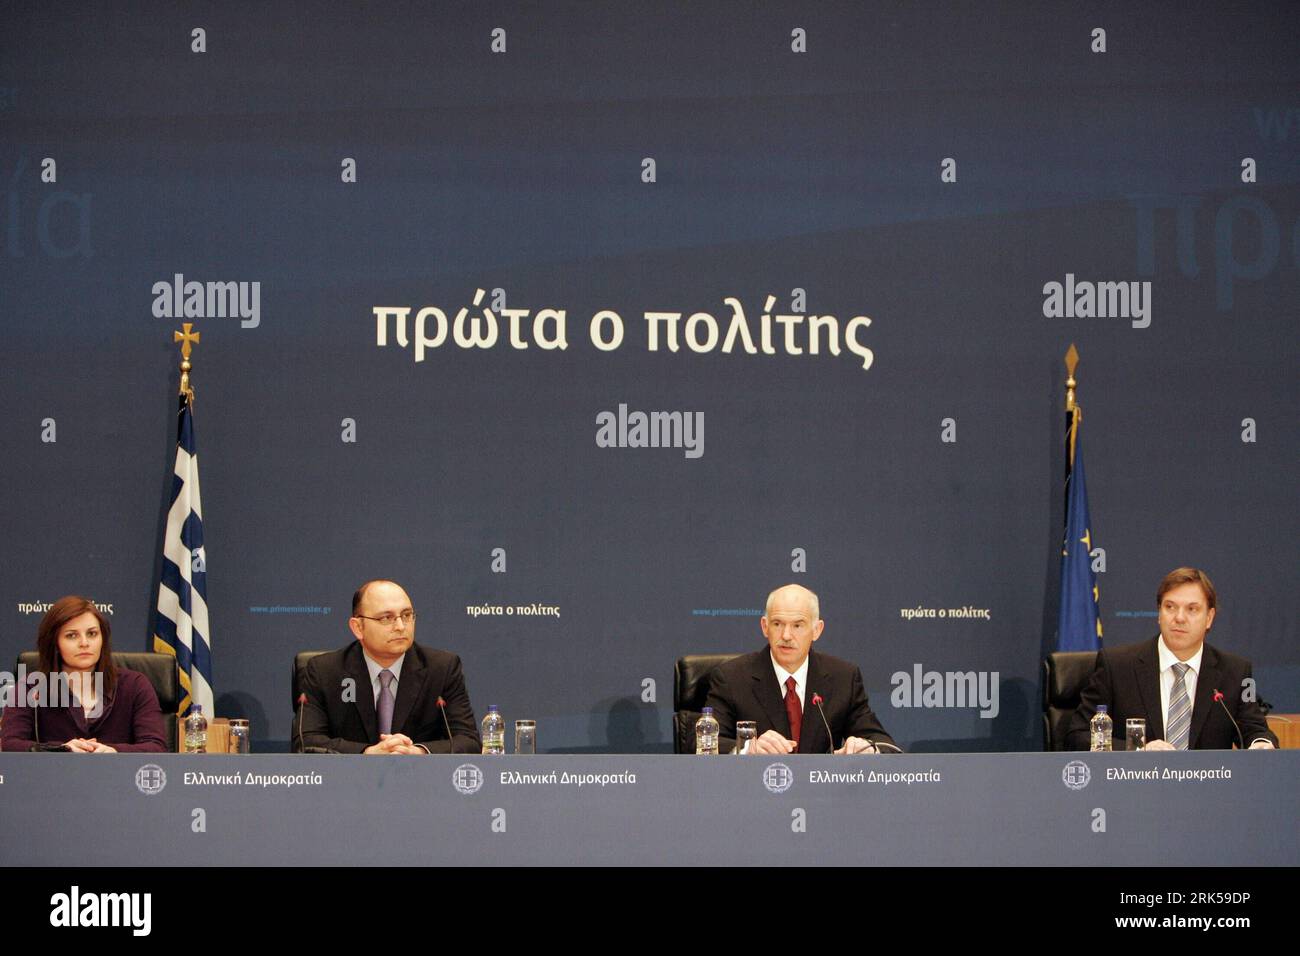 Bildnummer: 53724848  Datum: 13.01.2010  Copyright: imago/Xinhua (100113) -- ATHENS, Jan. 13, 2010 (Xinhua) -- Greek Prime Minister George Papandreou (2nd R) speaks during a press conference held on the day his socialist government completes 100 days in office in Athens, capital of Greece, Jan. 13, 2010. The unprecedented size of the economic crisis Greece faces today demands urgent, bold, historic measures and Greece can win the challenge alone, George Papandreou said on Wednesday. (Xinhua/Marios Lolos) (gxr) (5)GREECE-ATHENS-PM-PRESS CONFERENCE PUBLICATIONxNOTxINxCHN People Politik premiumd Stock Photo